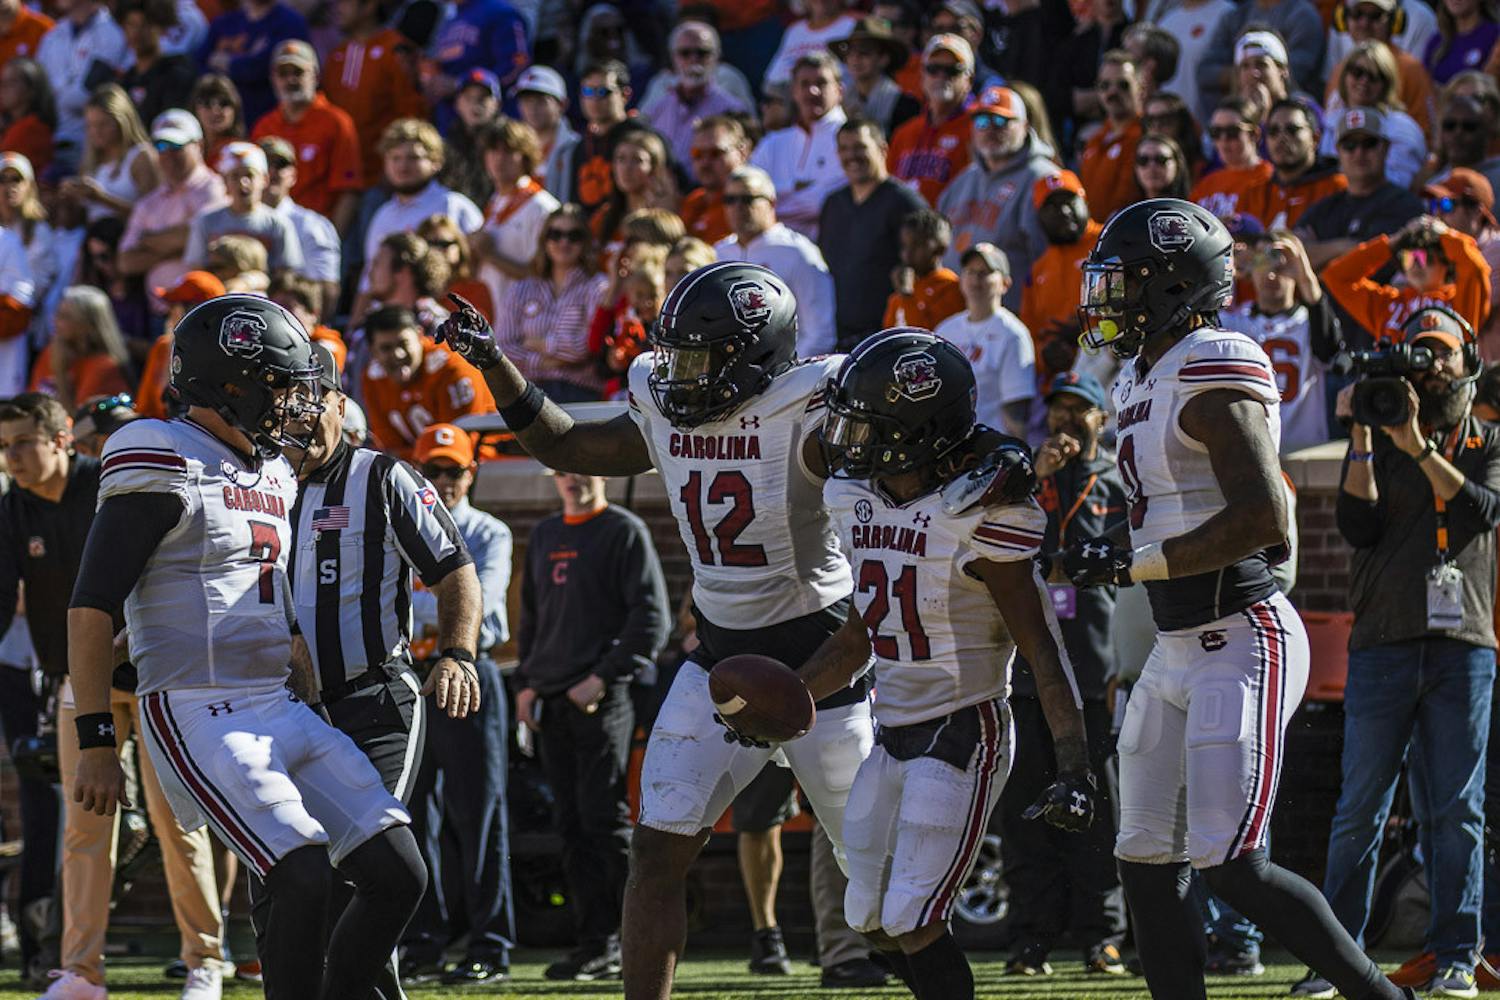 Redshirt junior quarterback Spencer Rattler (left) celebrates with (from left to right) redshirt junior tight end Traevon Kenion, junior running back Juju McDowell and junior tight end Jaheim Bell after he completes a pass to McDowell during the matchup between South Carolina and Clemson at Memorial Stadium in Clemson, South Carolina, on Nov. 26, 2022. The Gamecocks upset the Tigers 31-30, marking the first time South Carolina has beaten Clemson since 2013.
